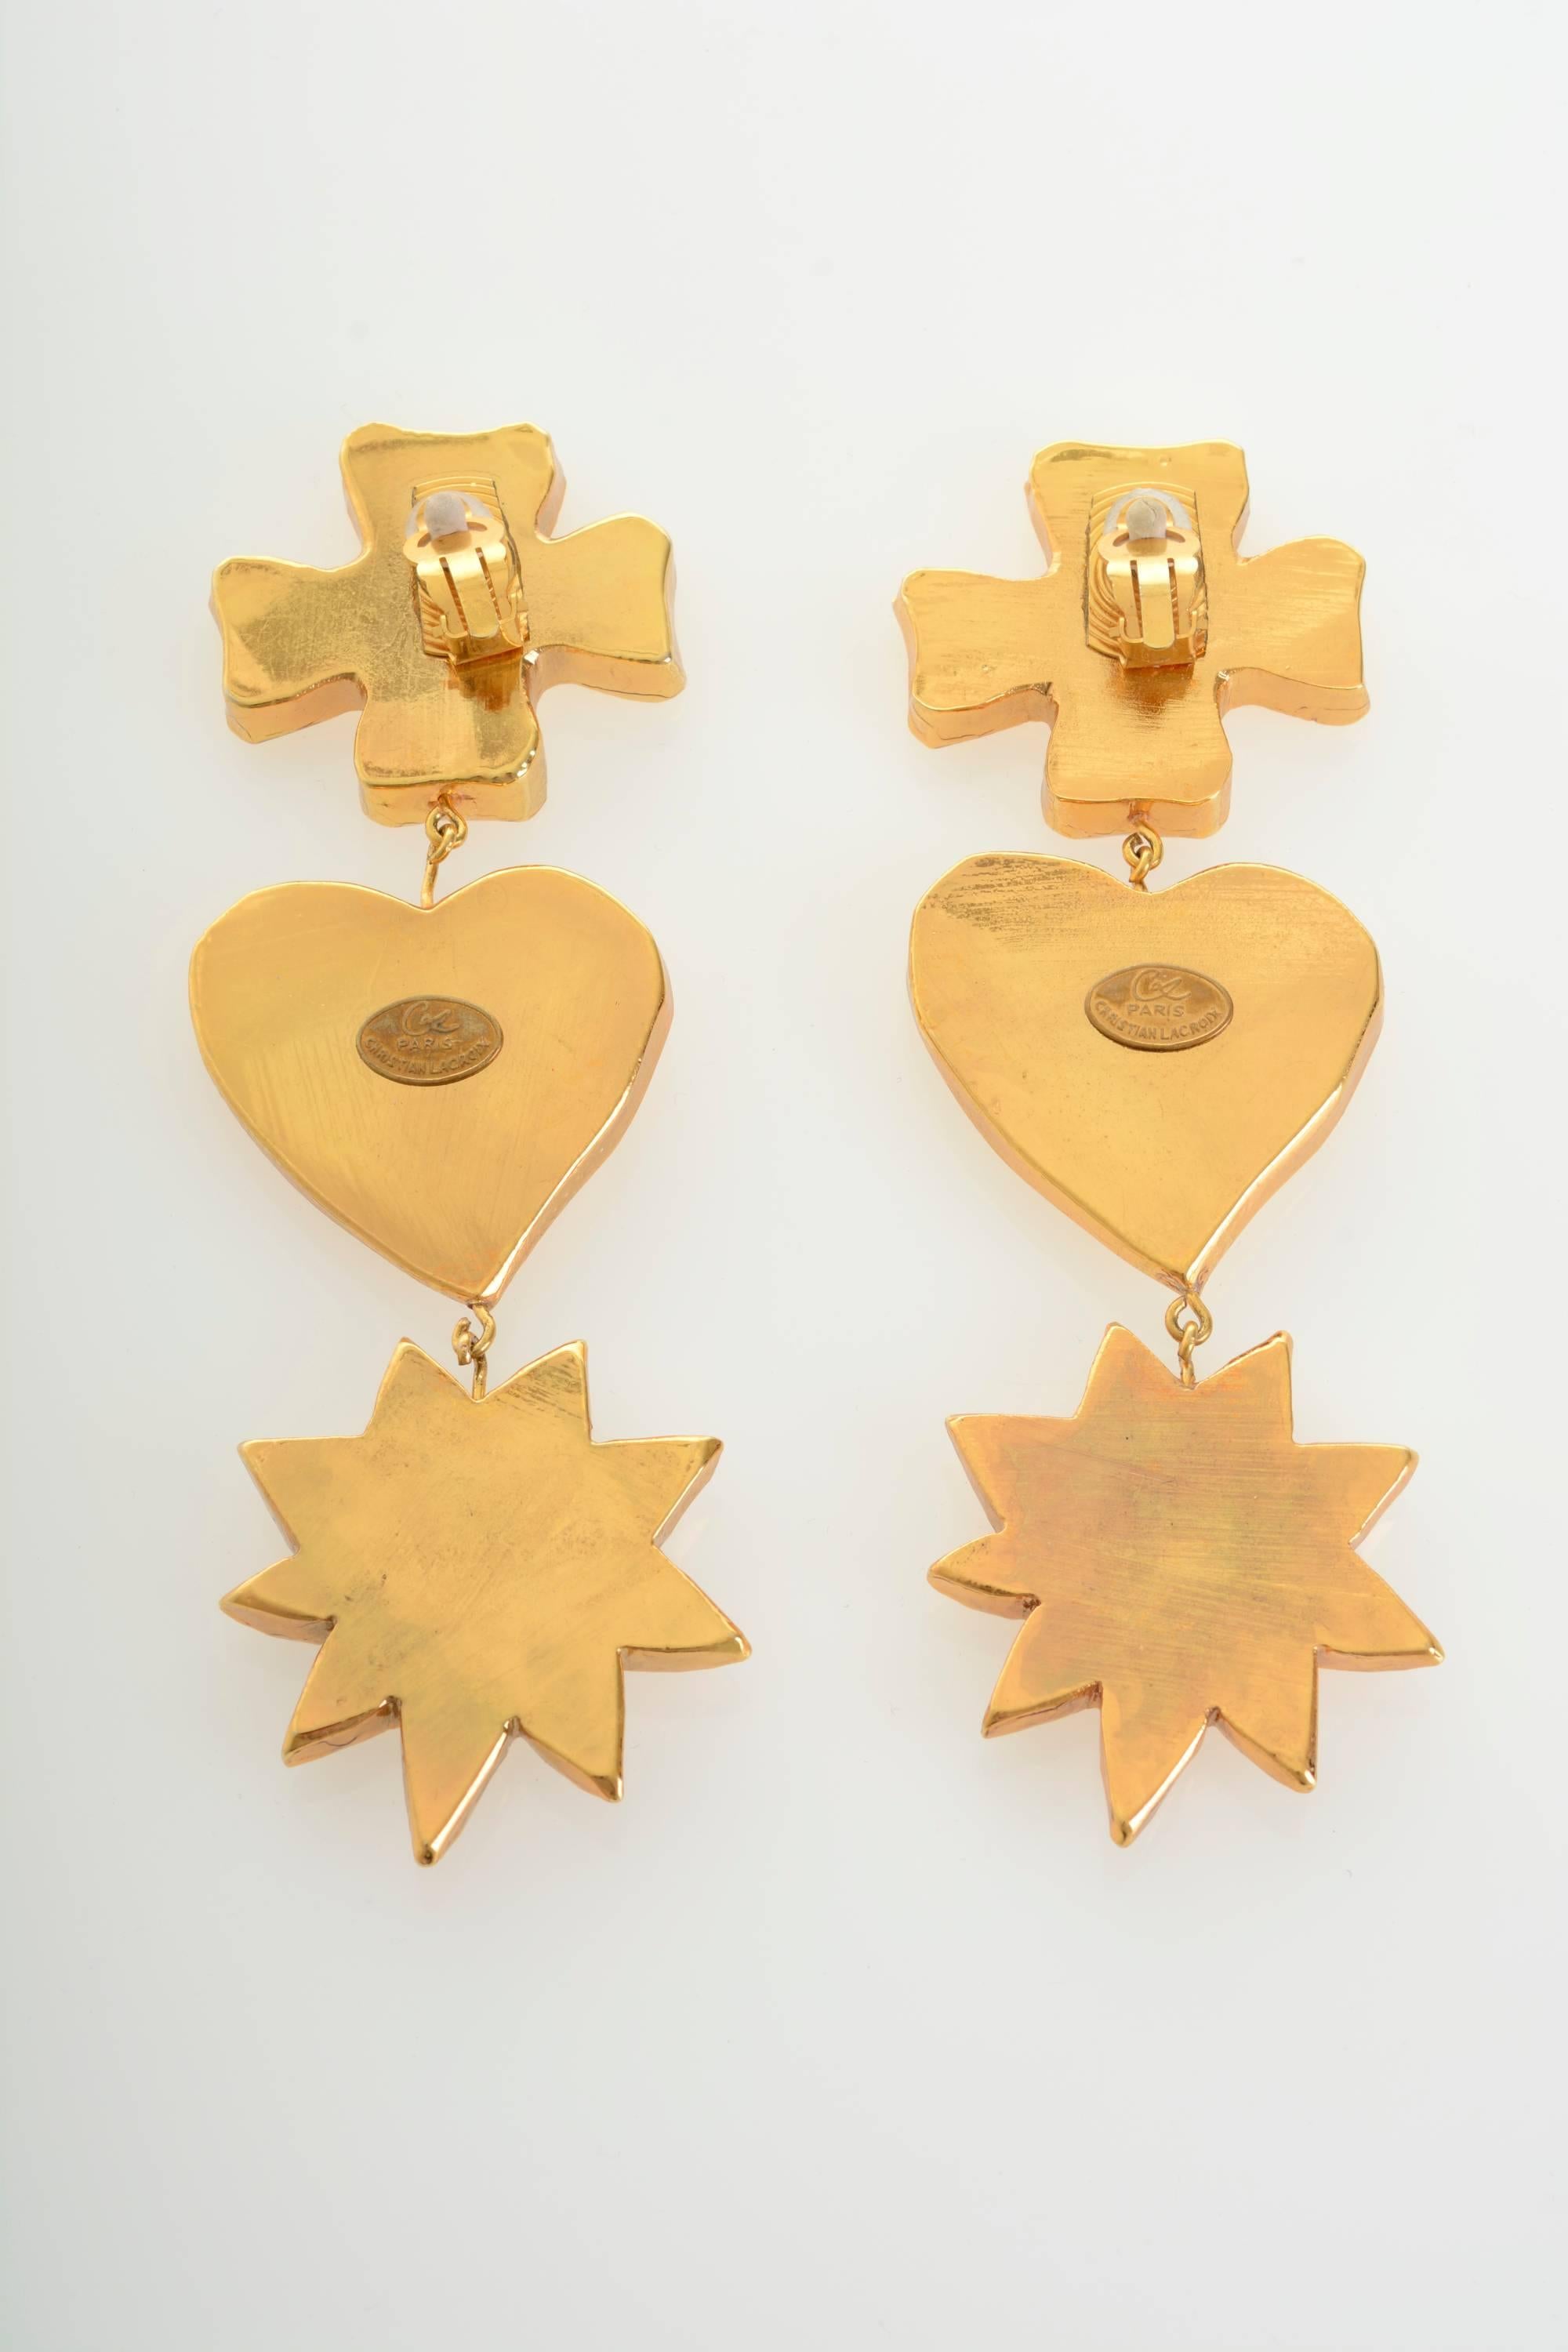 These amazing 1980s earrings from Christian Lacroix are in gold tone metal. They have Christian Lacroix logo inscribed on the cross and clip on back.

Excellent condition

Measurement:
Length 5,50 inch
Width 1,75 inch